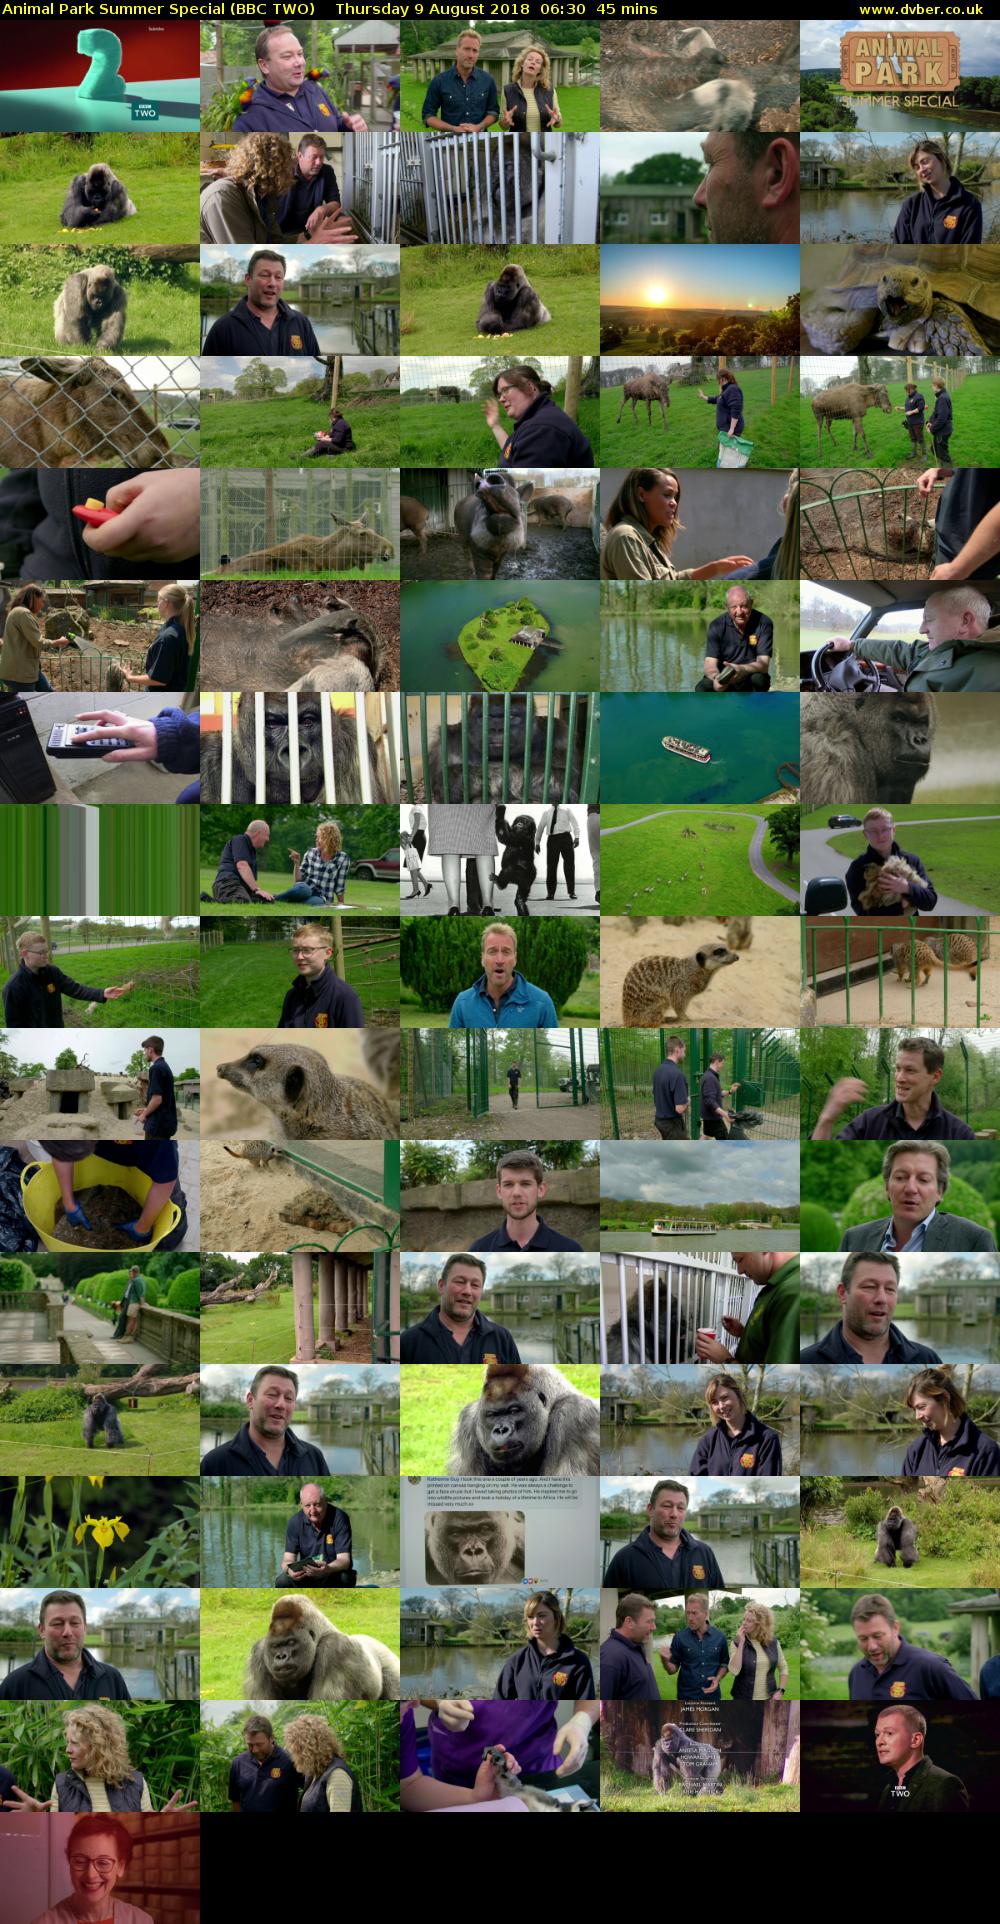 Animal Park Summer Special (BBC TWO) Thursday 9 August 2018 06:30 - 07:15